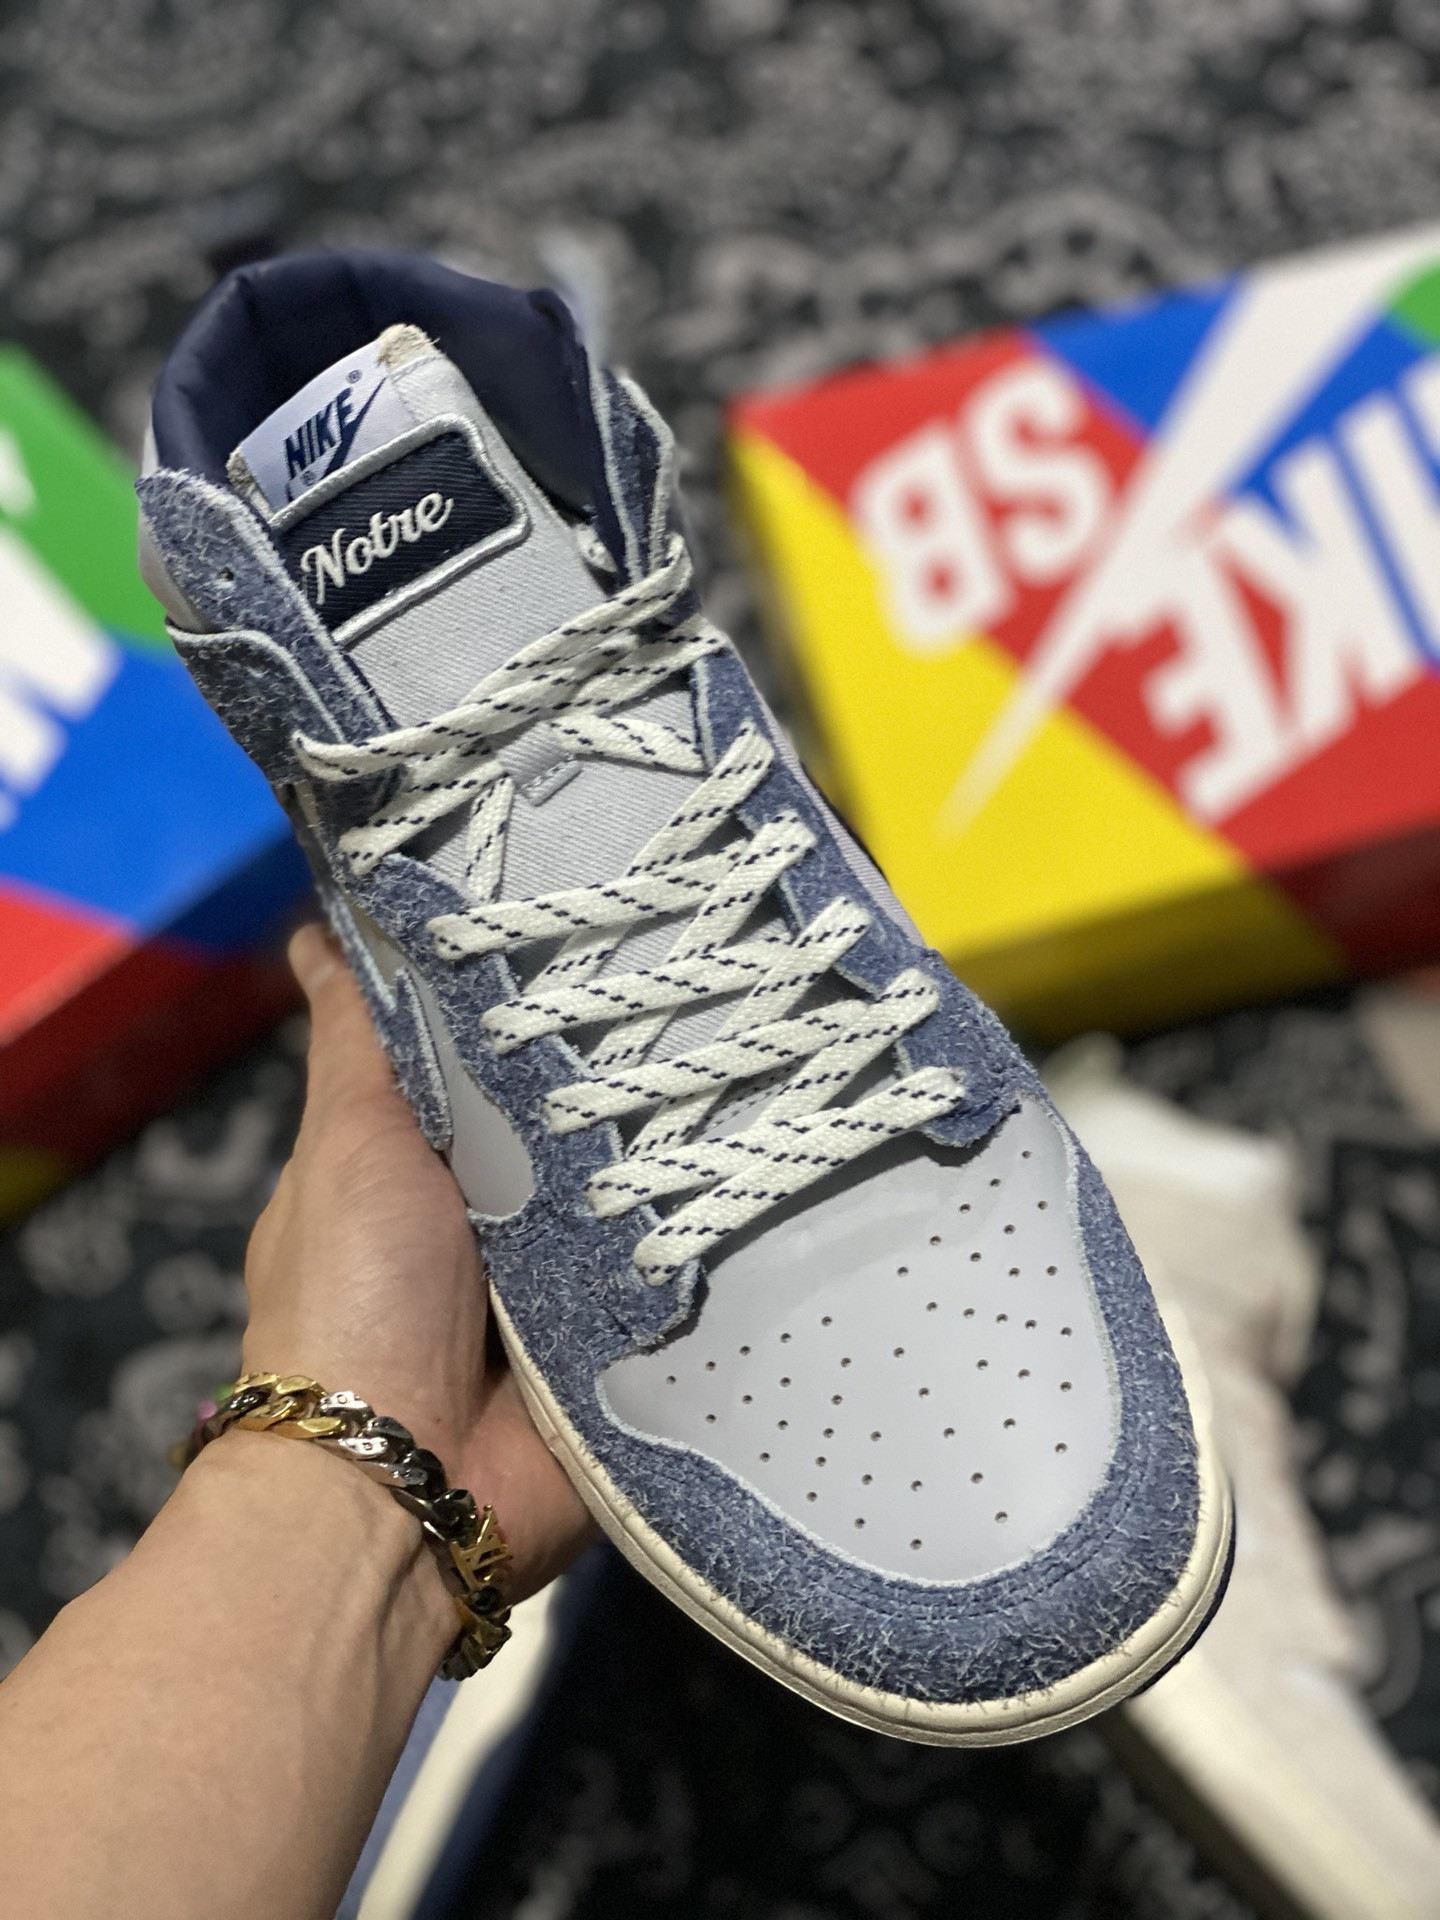 Notre x Nike Dunk High Midnight Navy Sky Grey-Fossil For Sale